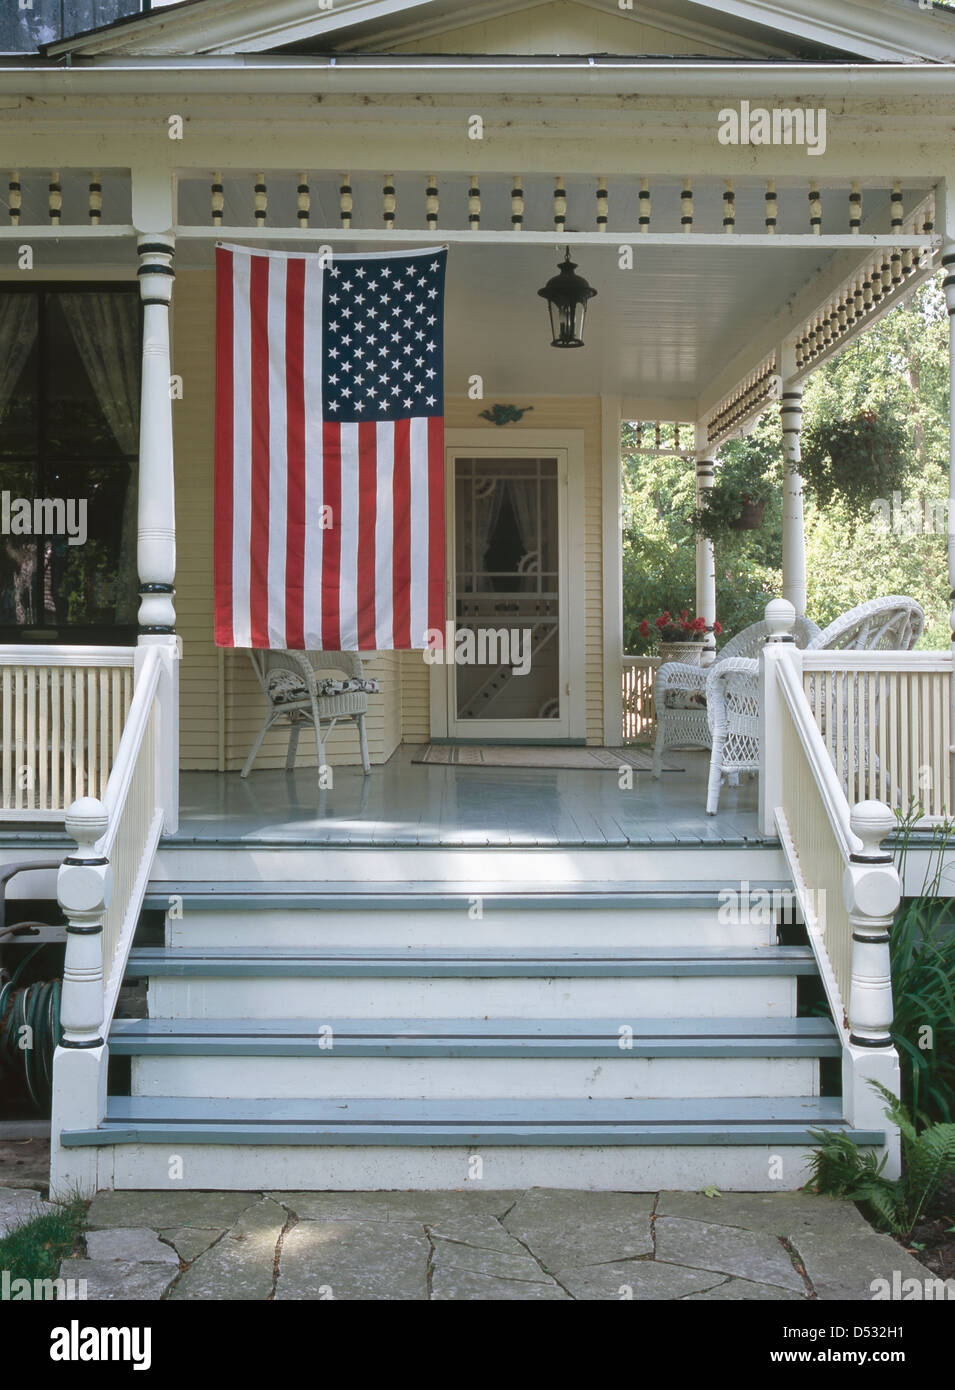 American flag hanging at front porch of house Stock Photo